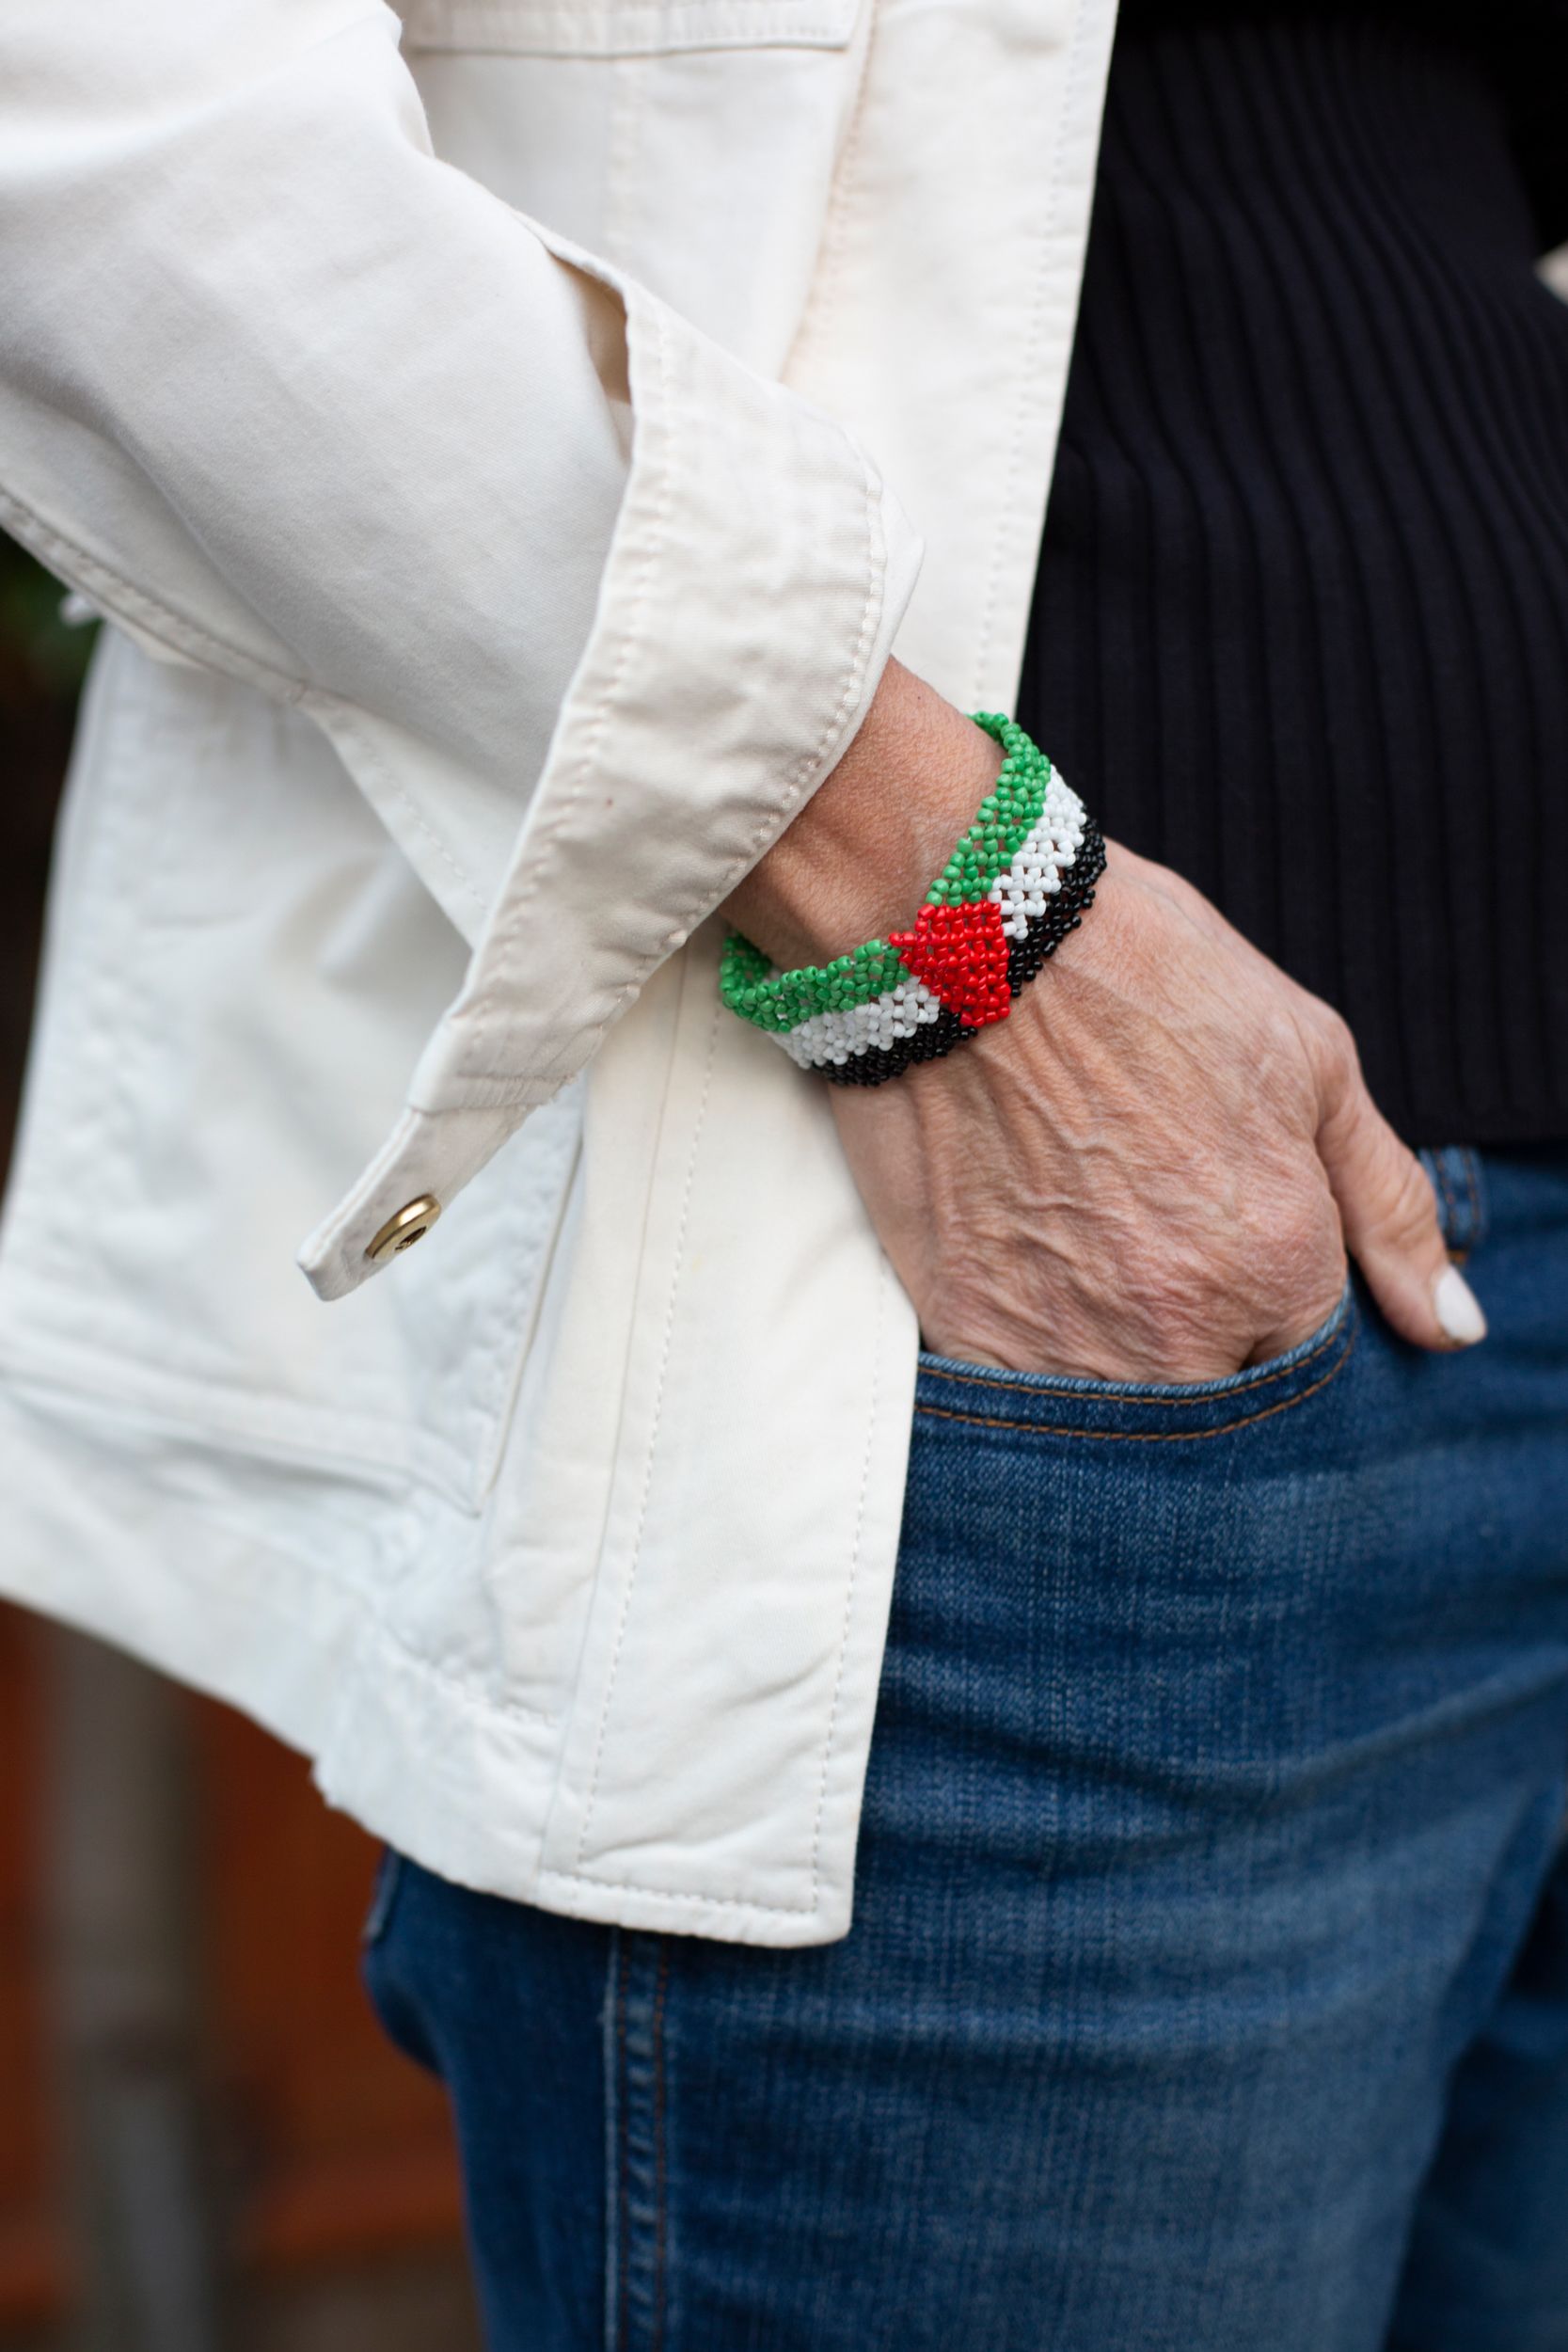 Rima Qasim shows her love for Palestine with her accessories in Passaic, New Jersey, on November 15.